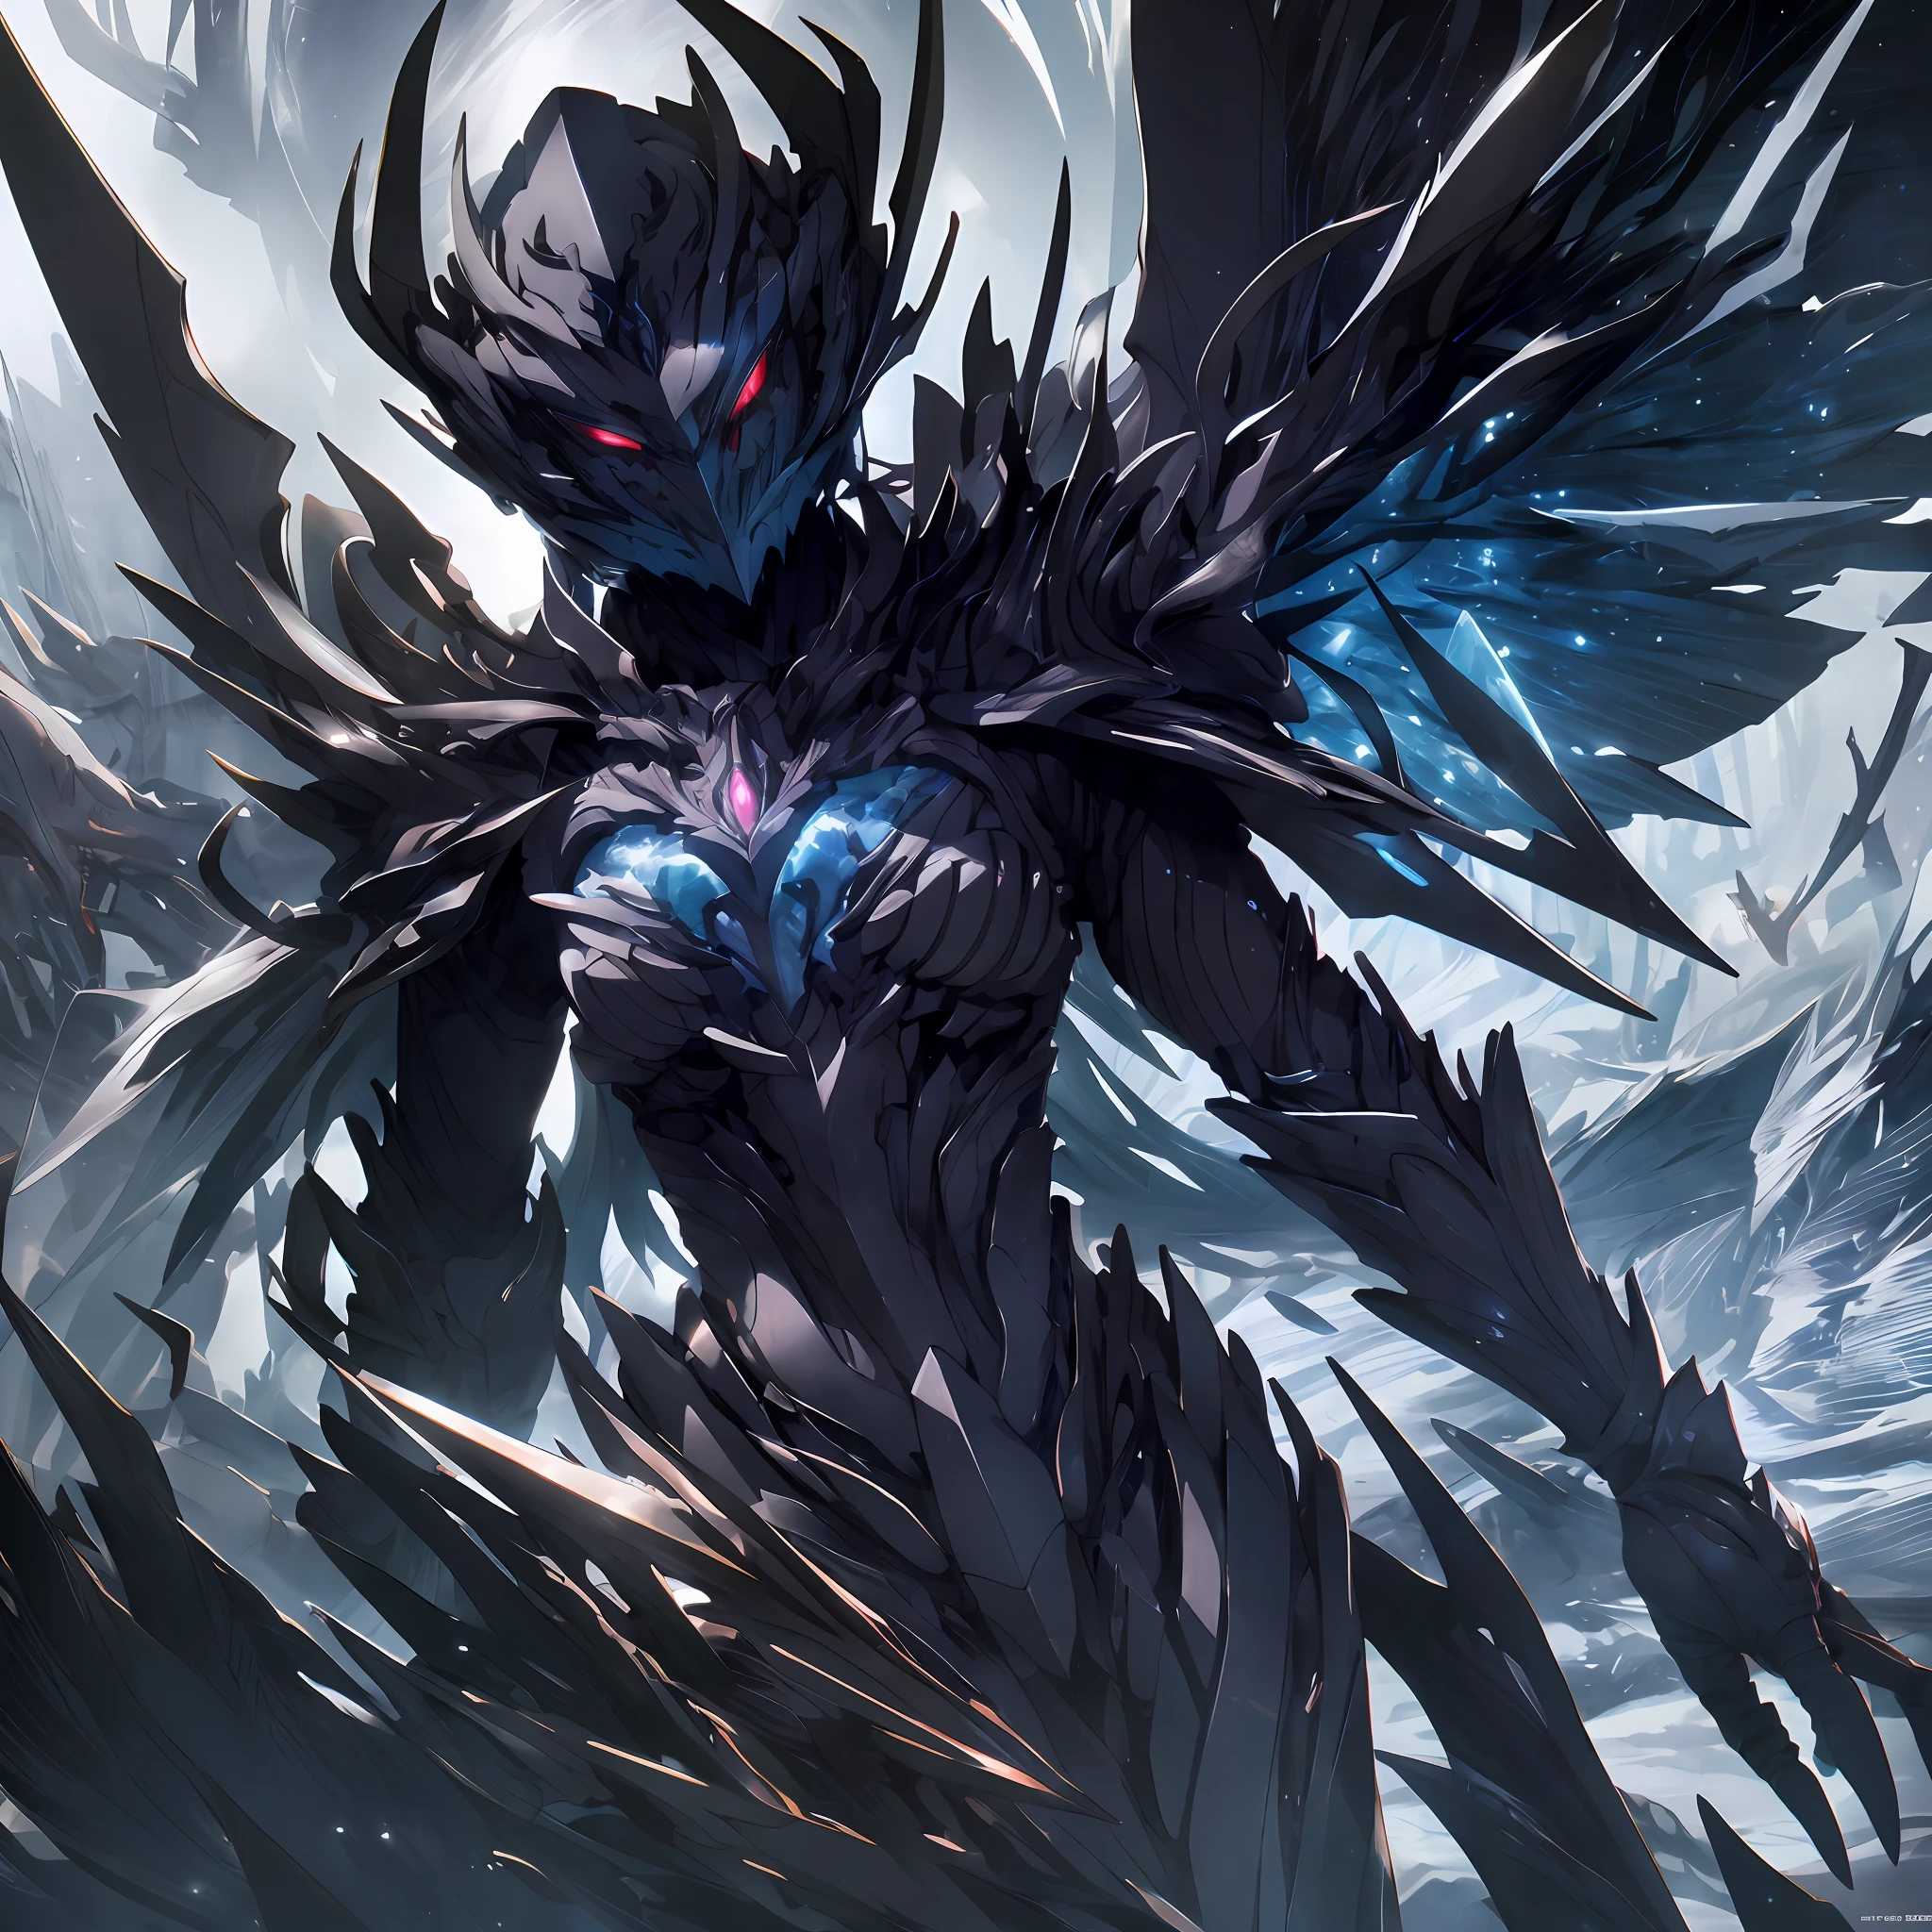 masterpiece, female, highly detailed CG unified 8K wallpapers, 8k uhd, dslr, high quality, clean, best illumination, a god in a black armor, glowing eyes, cinematic, ice wing, godly aura, ultra-high resolution, ultra-high detailed, high-definition, shadowverse style